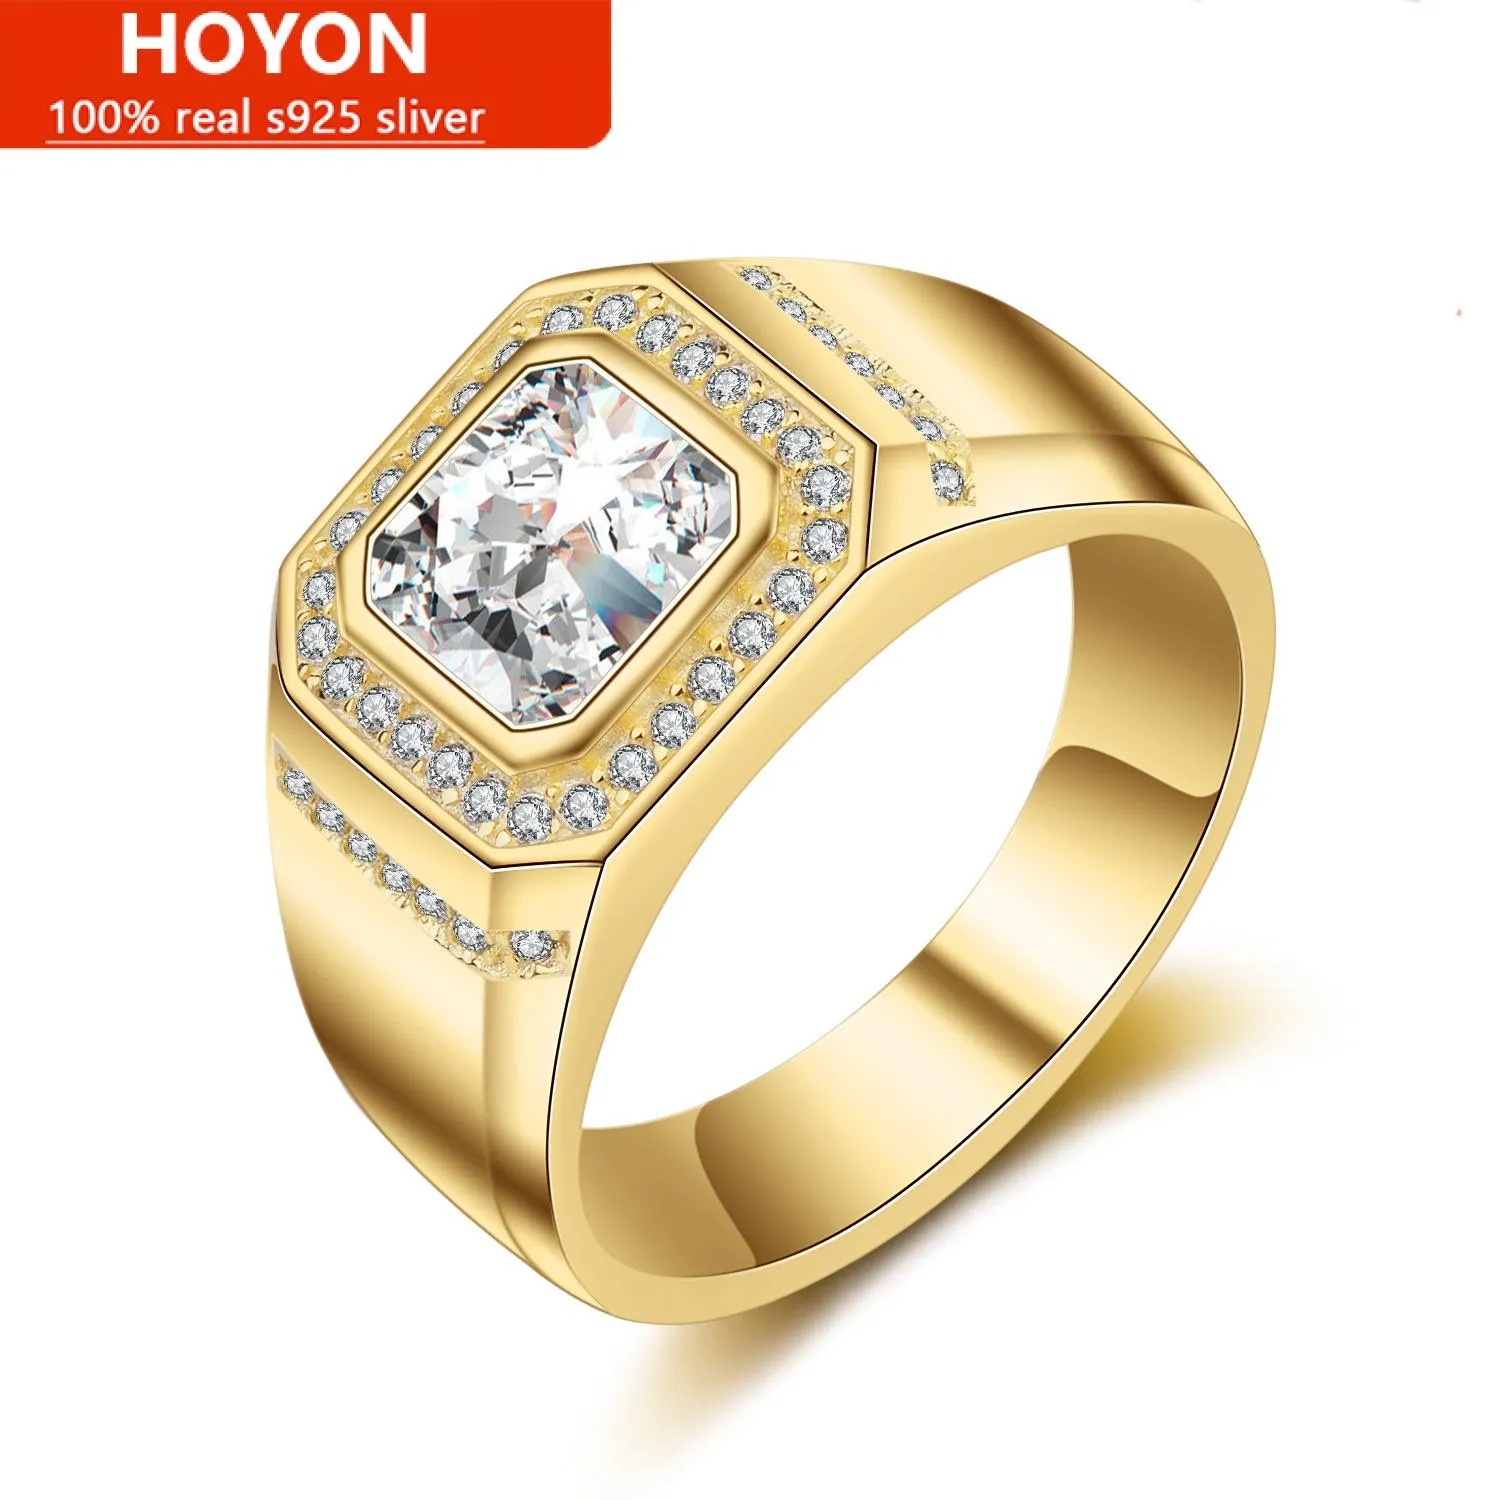 Hoyon 14K Gold Gold Color Rectangle Cut Simulation Riamond for Men Women White Gold Coating AAA Zircon Fine Jewelry Gifts